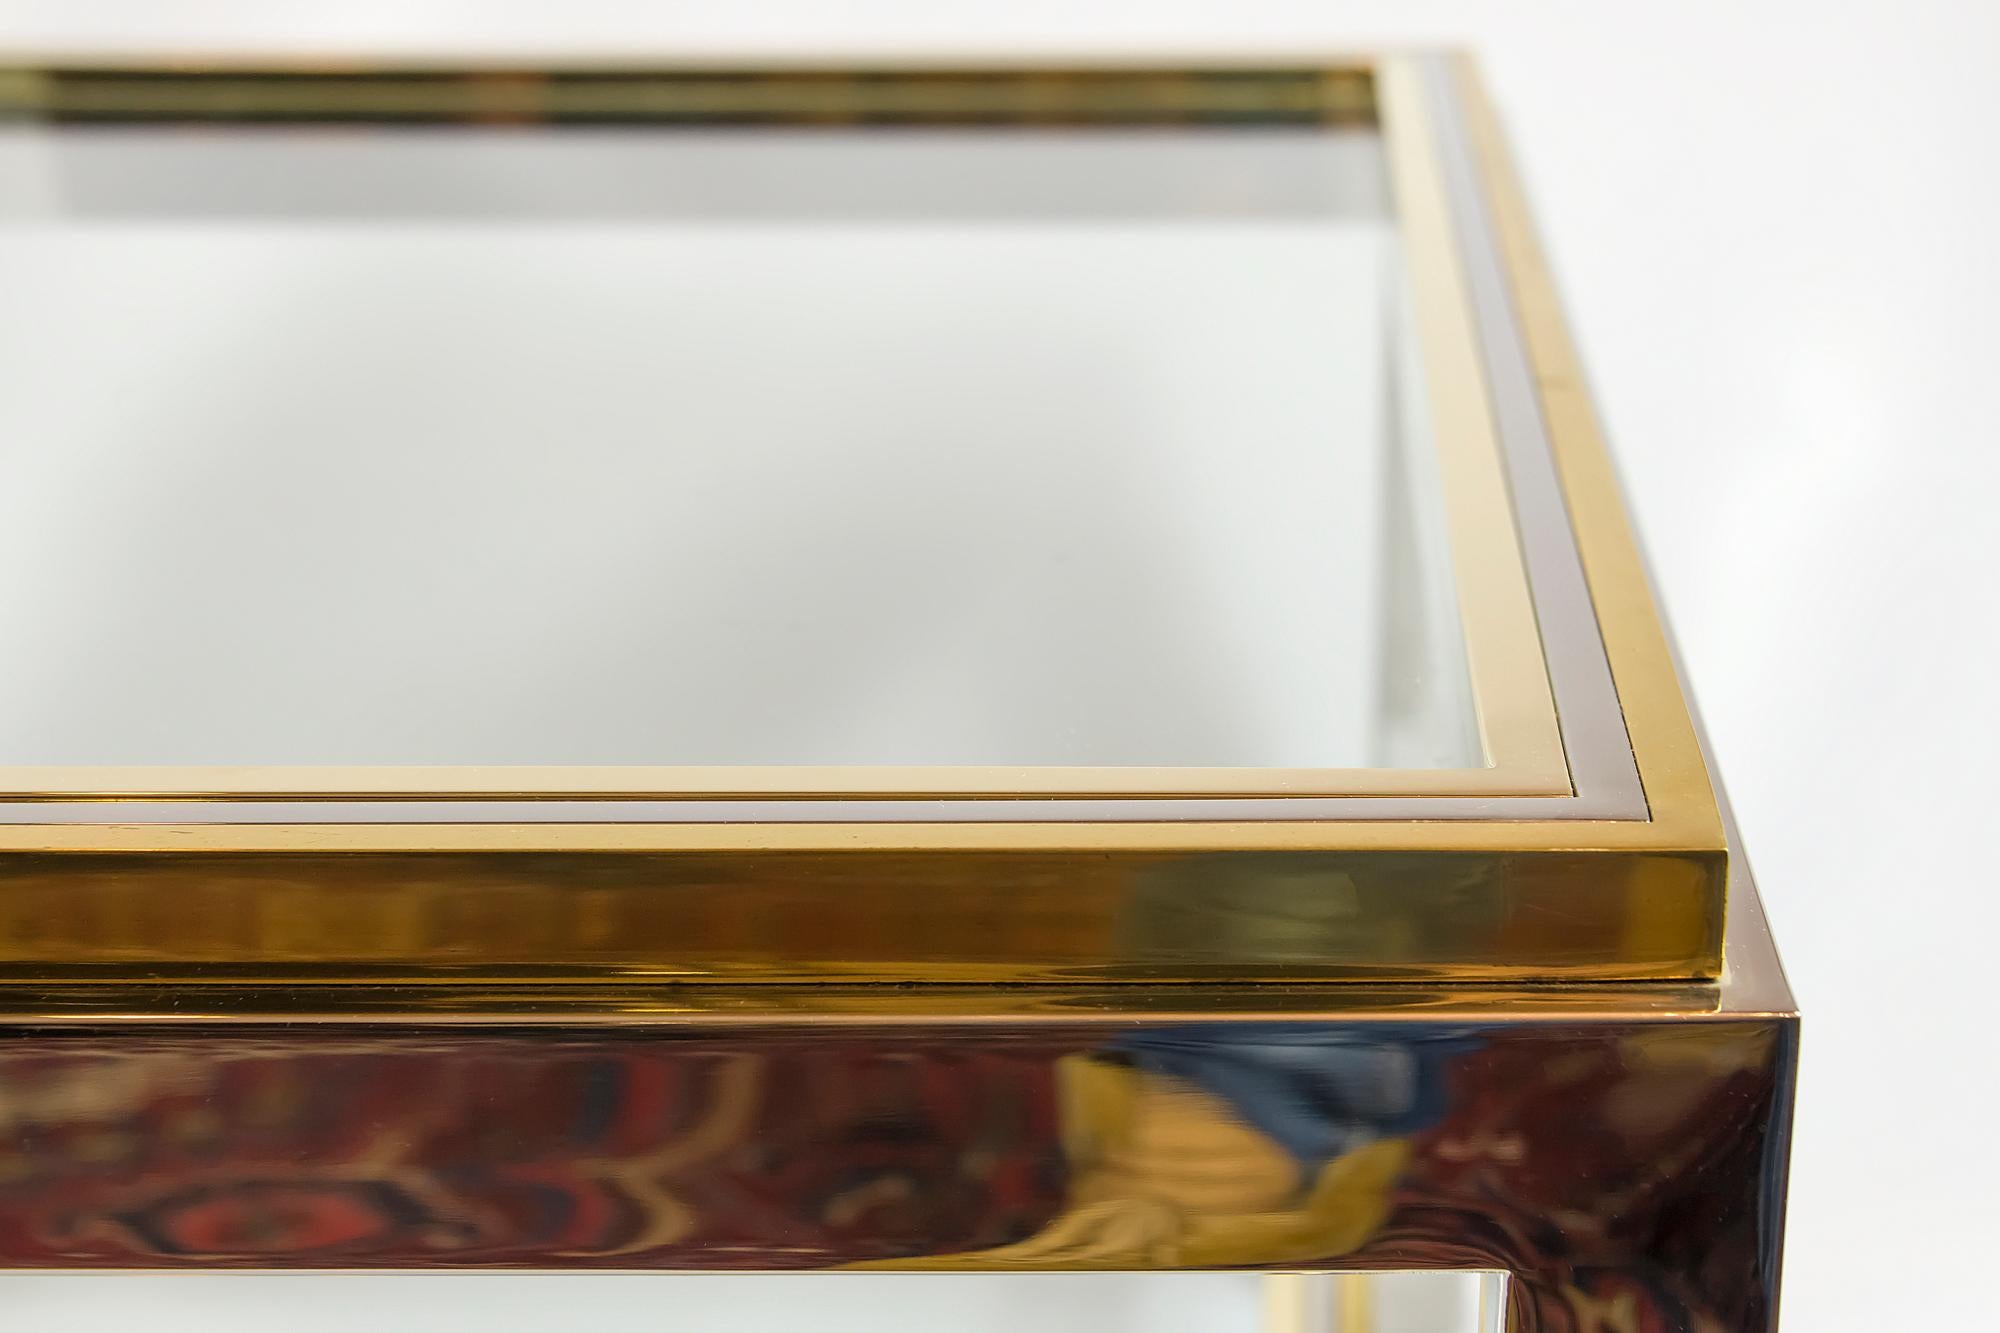 20th Century Italian Midcentury Brass, Chrome and Glass Coffee Table, Willy Rizzo, circa 1960